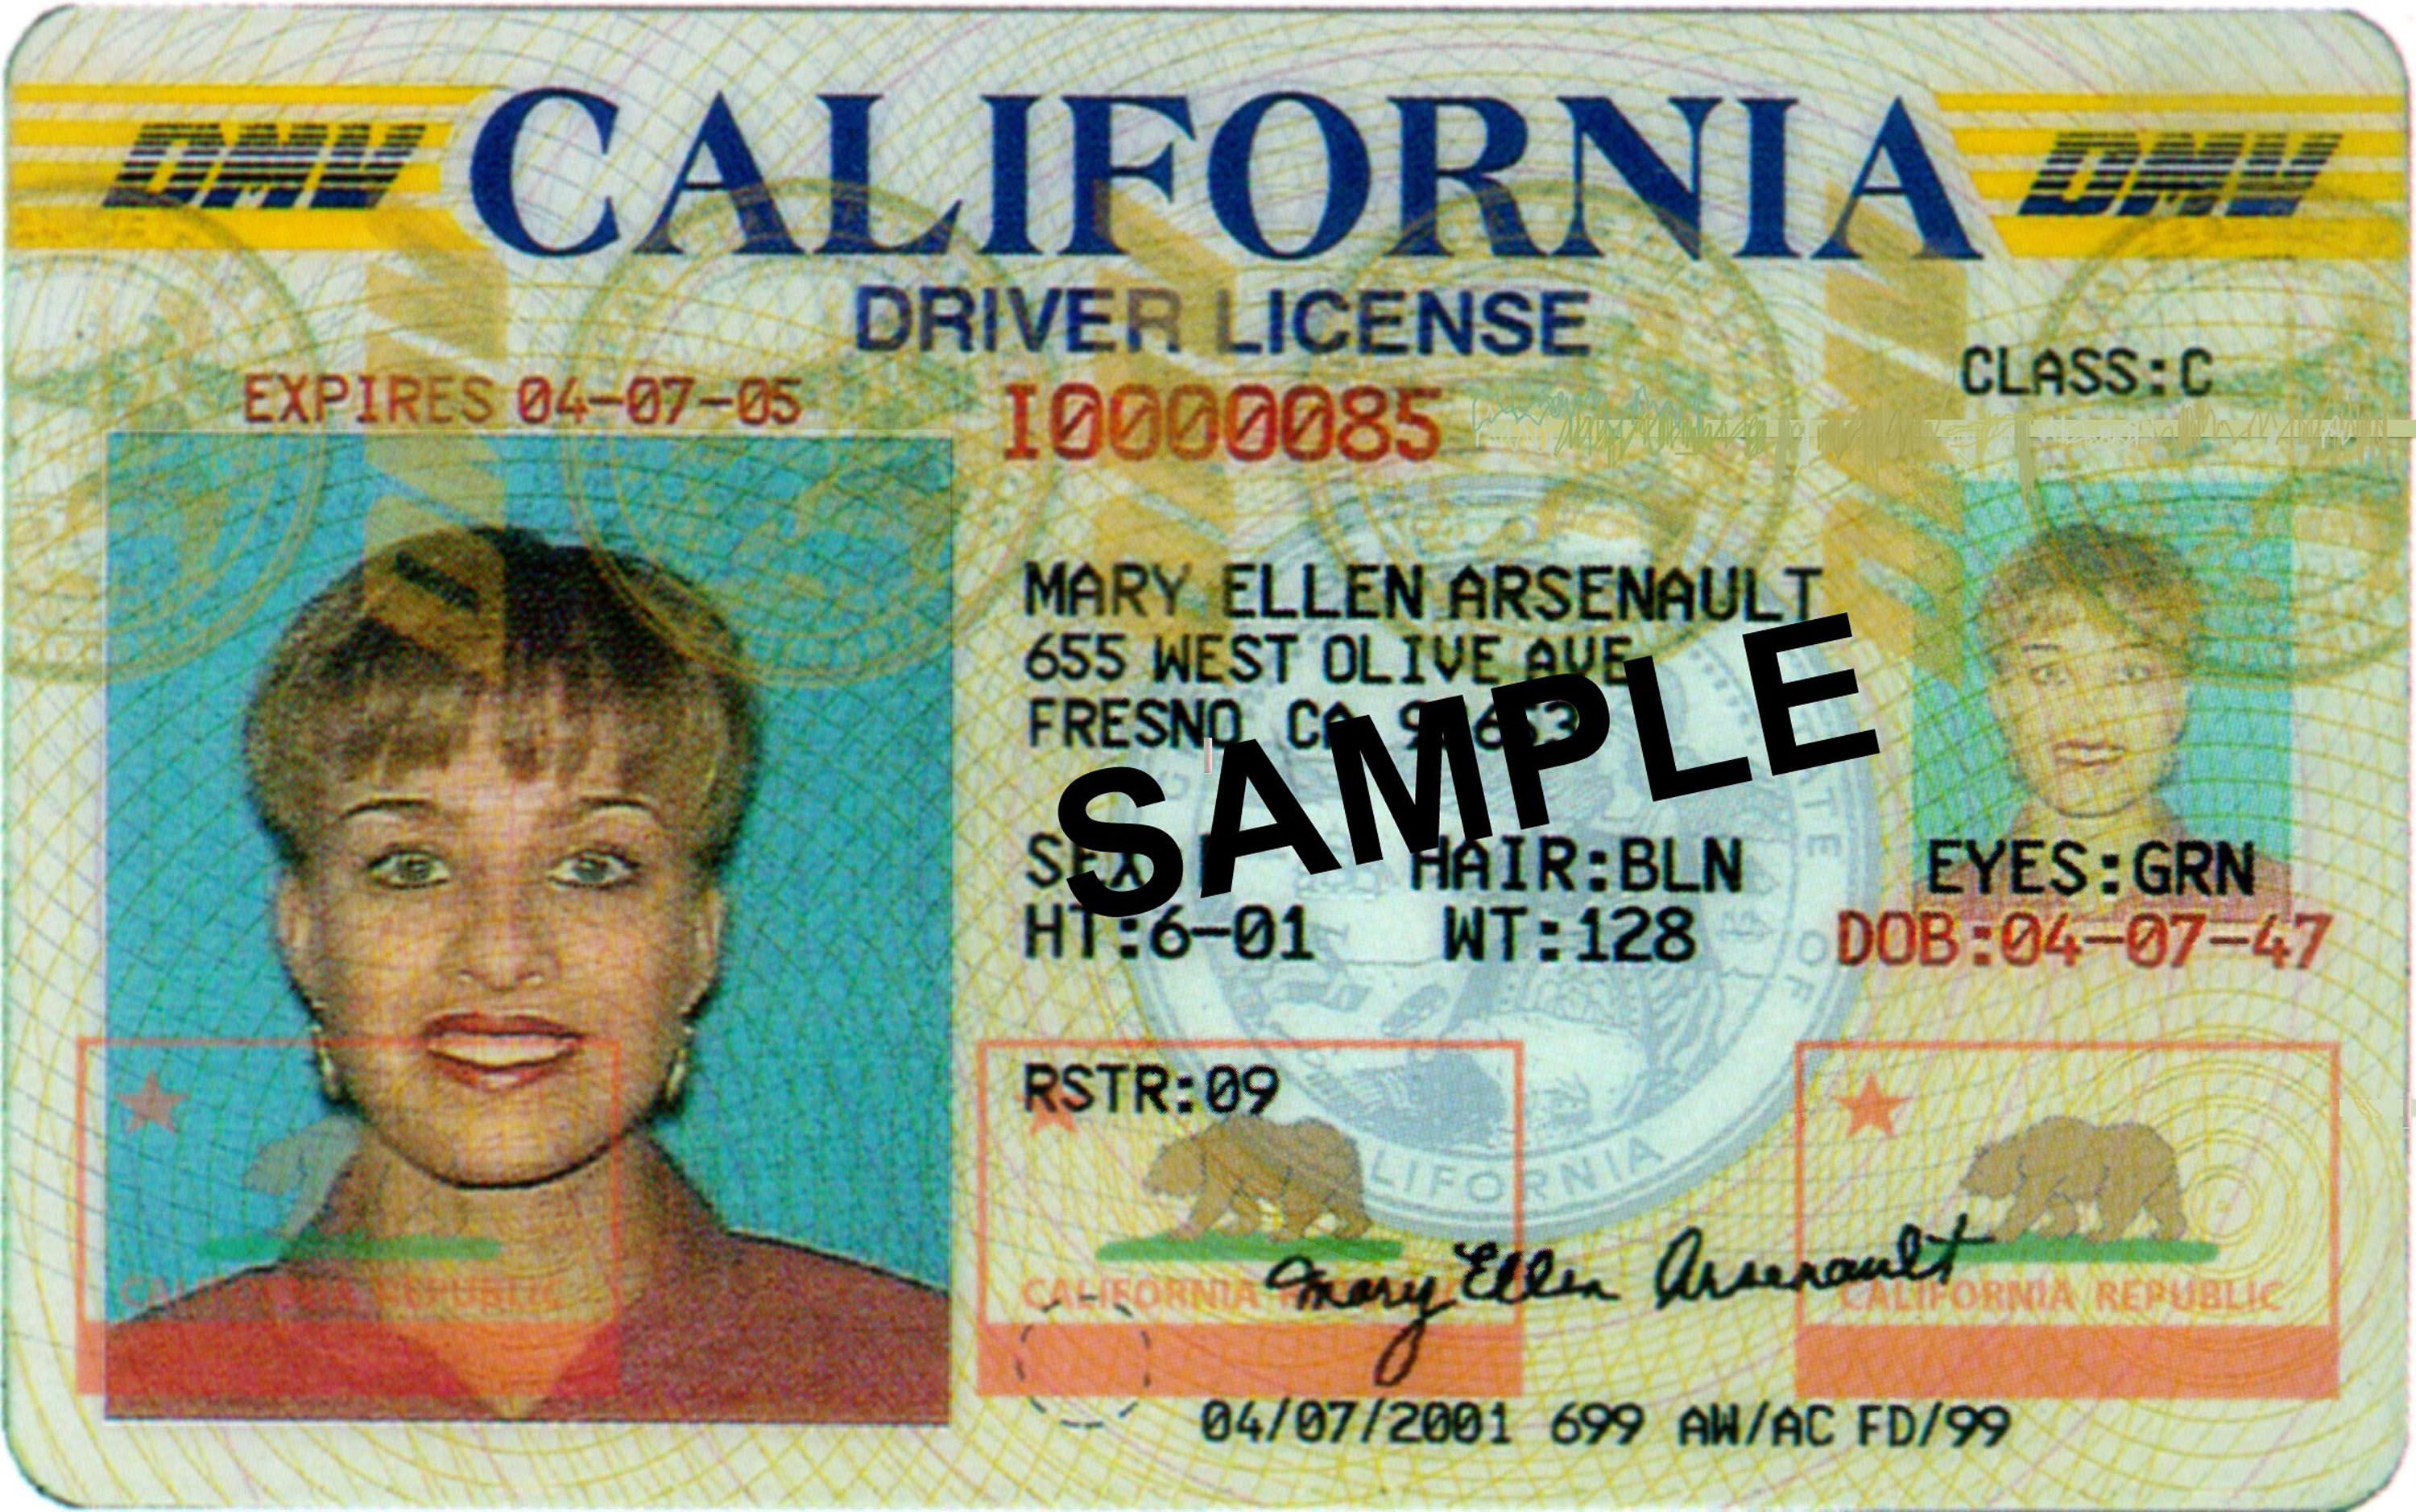 new california id to travel